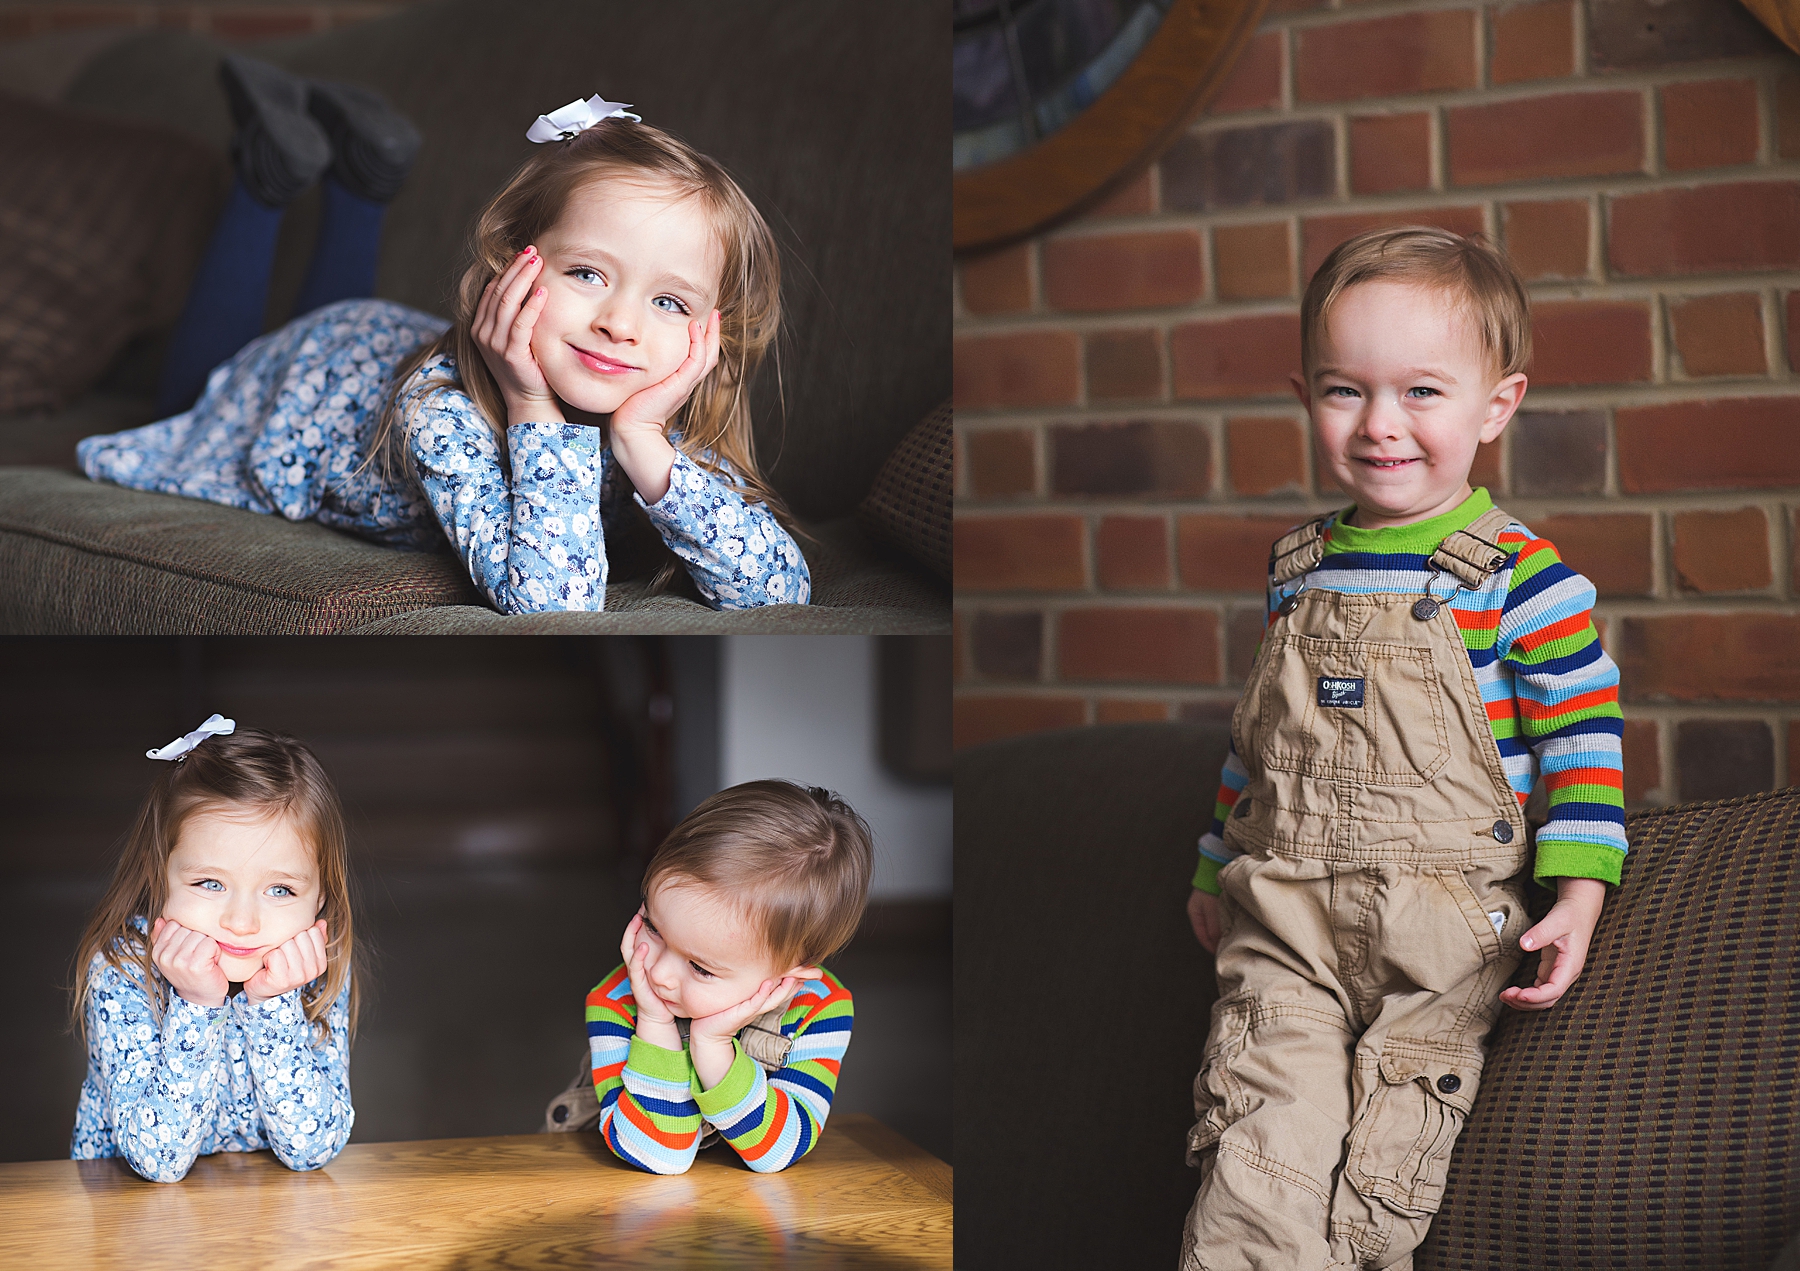 photos of little boy and girl taken with window light how to take good pictures kristina rose photography